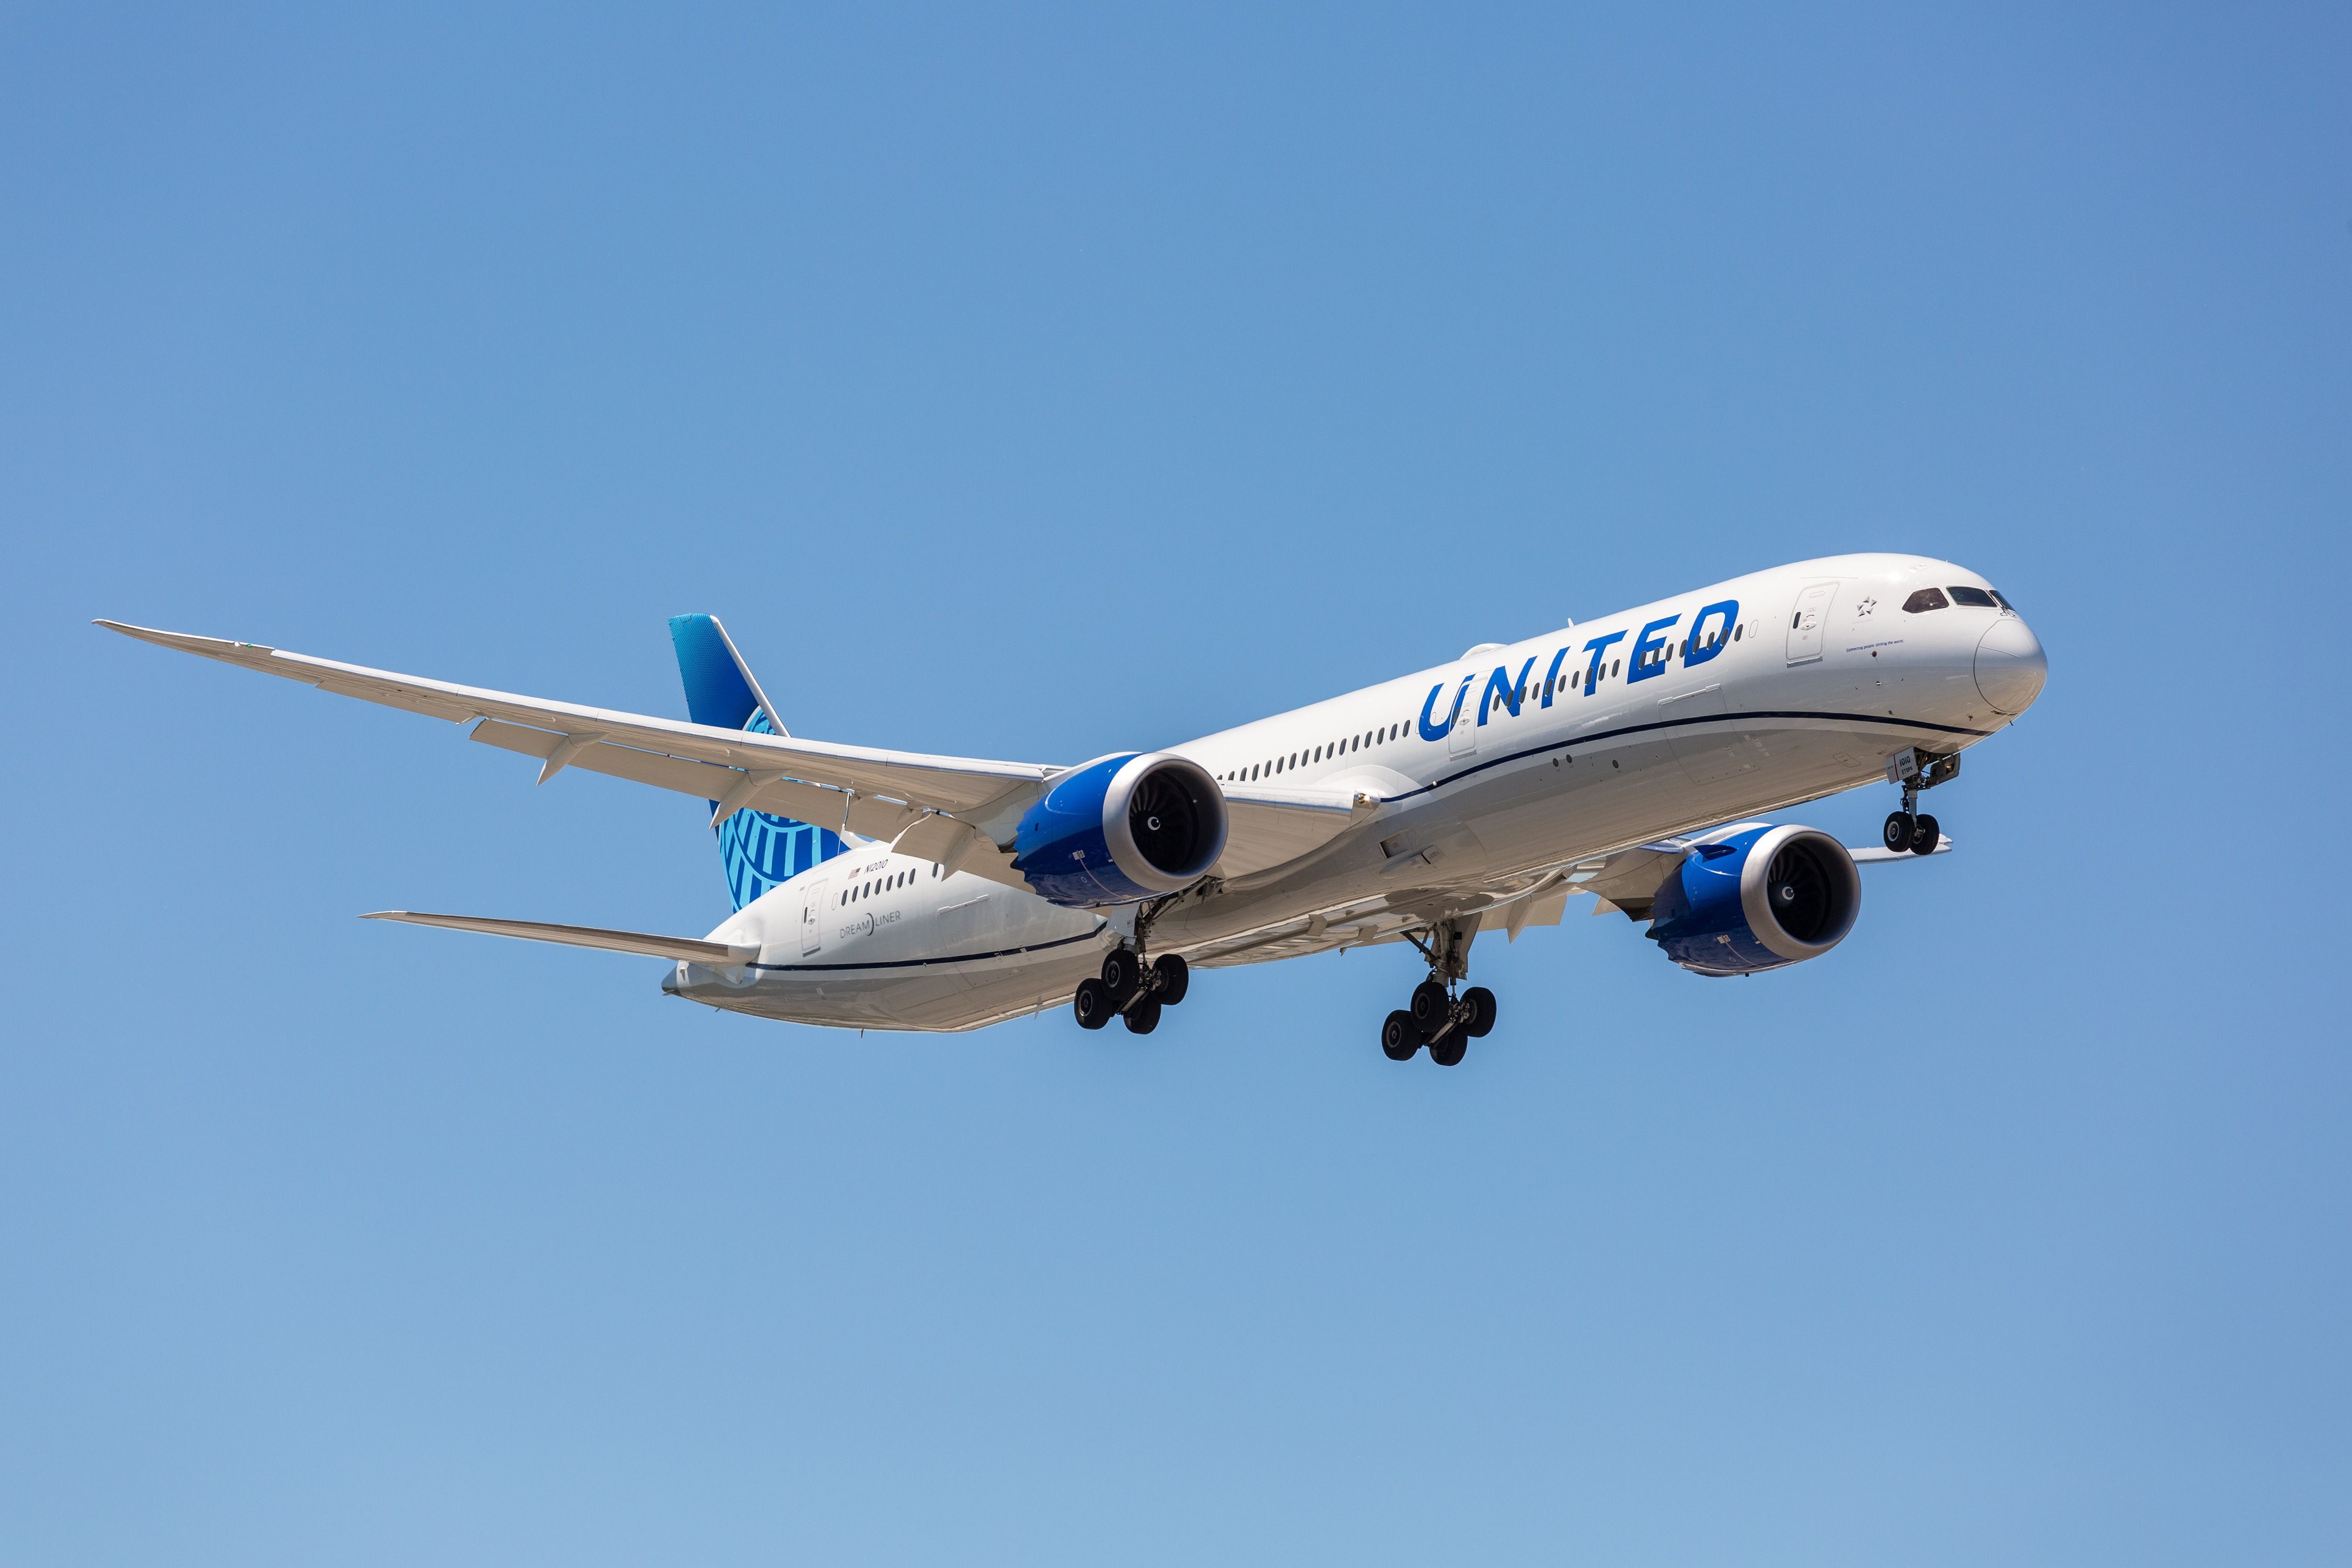 A United Airlines Boeing 787 flying in the sky.